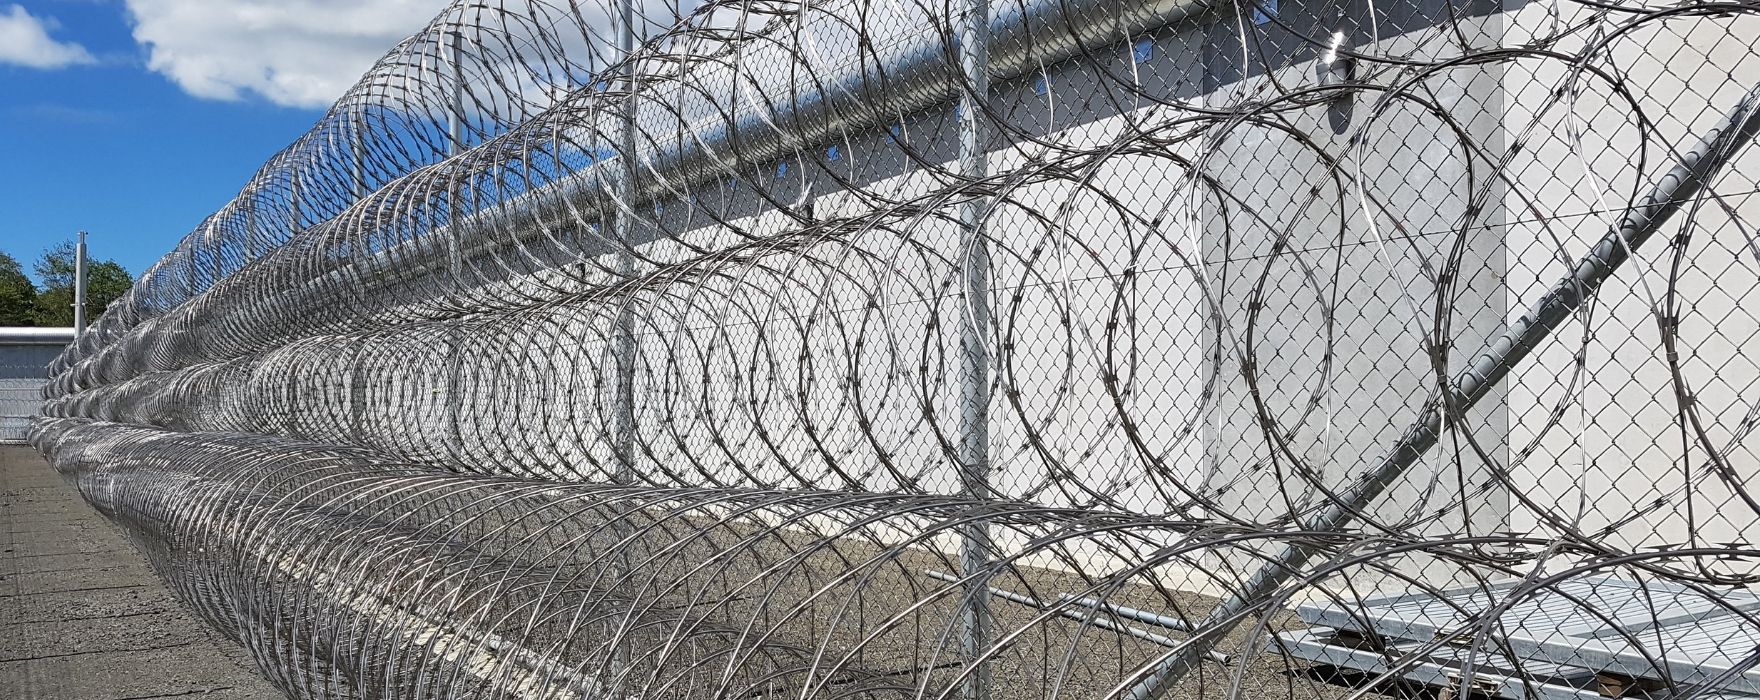 Several coils of cross razor wire work with chain link fence to offer maximum security.